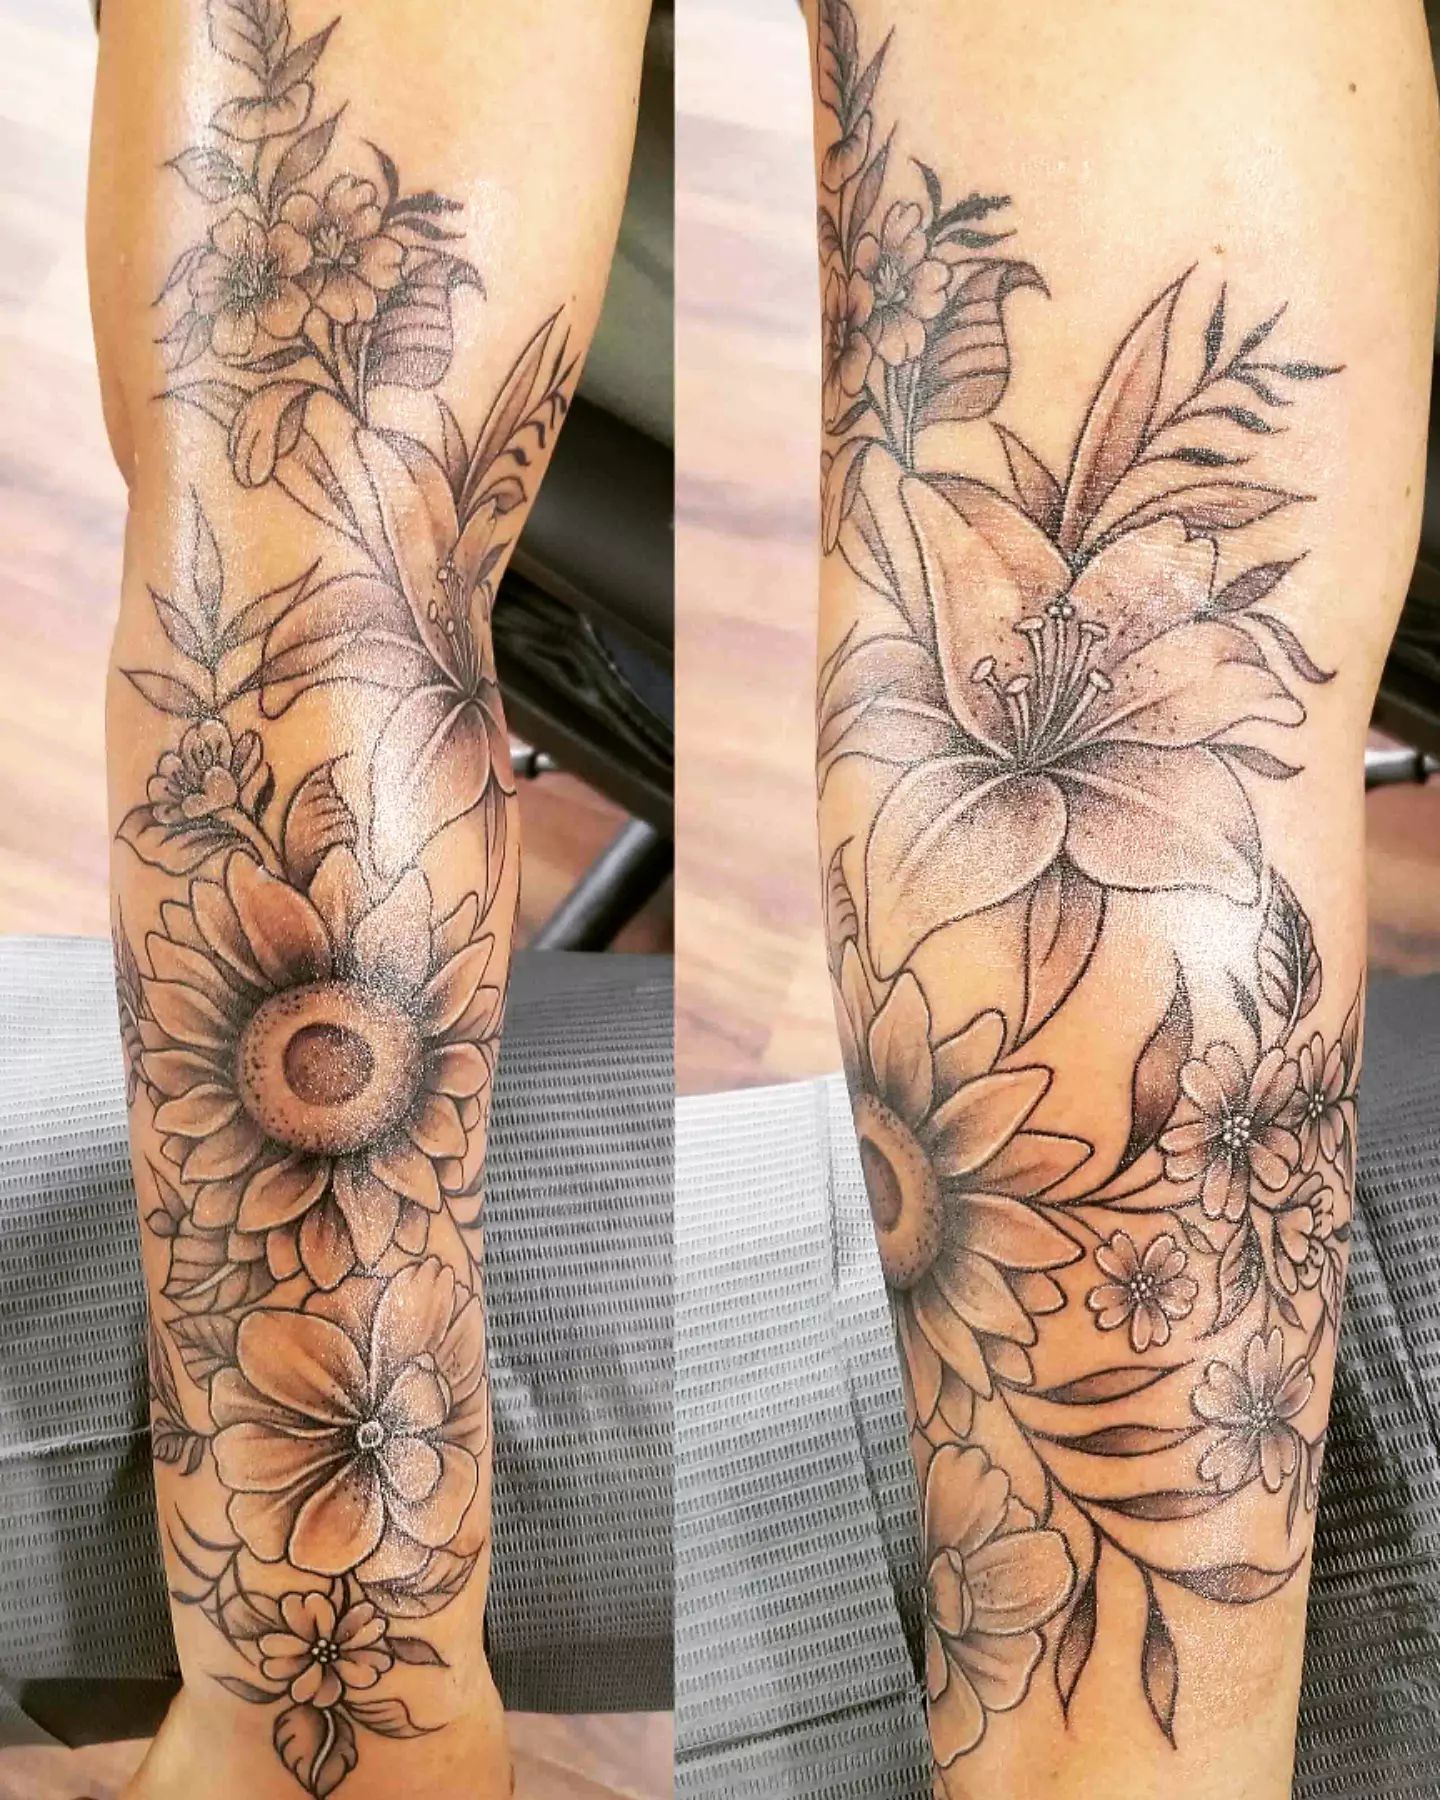 Tattoo uploaded by Tattoodo • Flower tattoo by Jen Tonic #JenTonic  #tattooideas #tattooidea #tattooinspiration #tattoodesign #tattoodesignidea  #tattooinspo #wrist #hand #flower #floral #color #neotraditional • Tattoodo